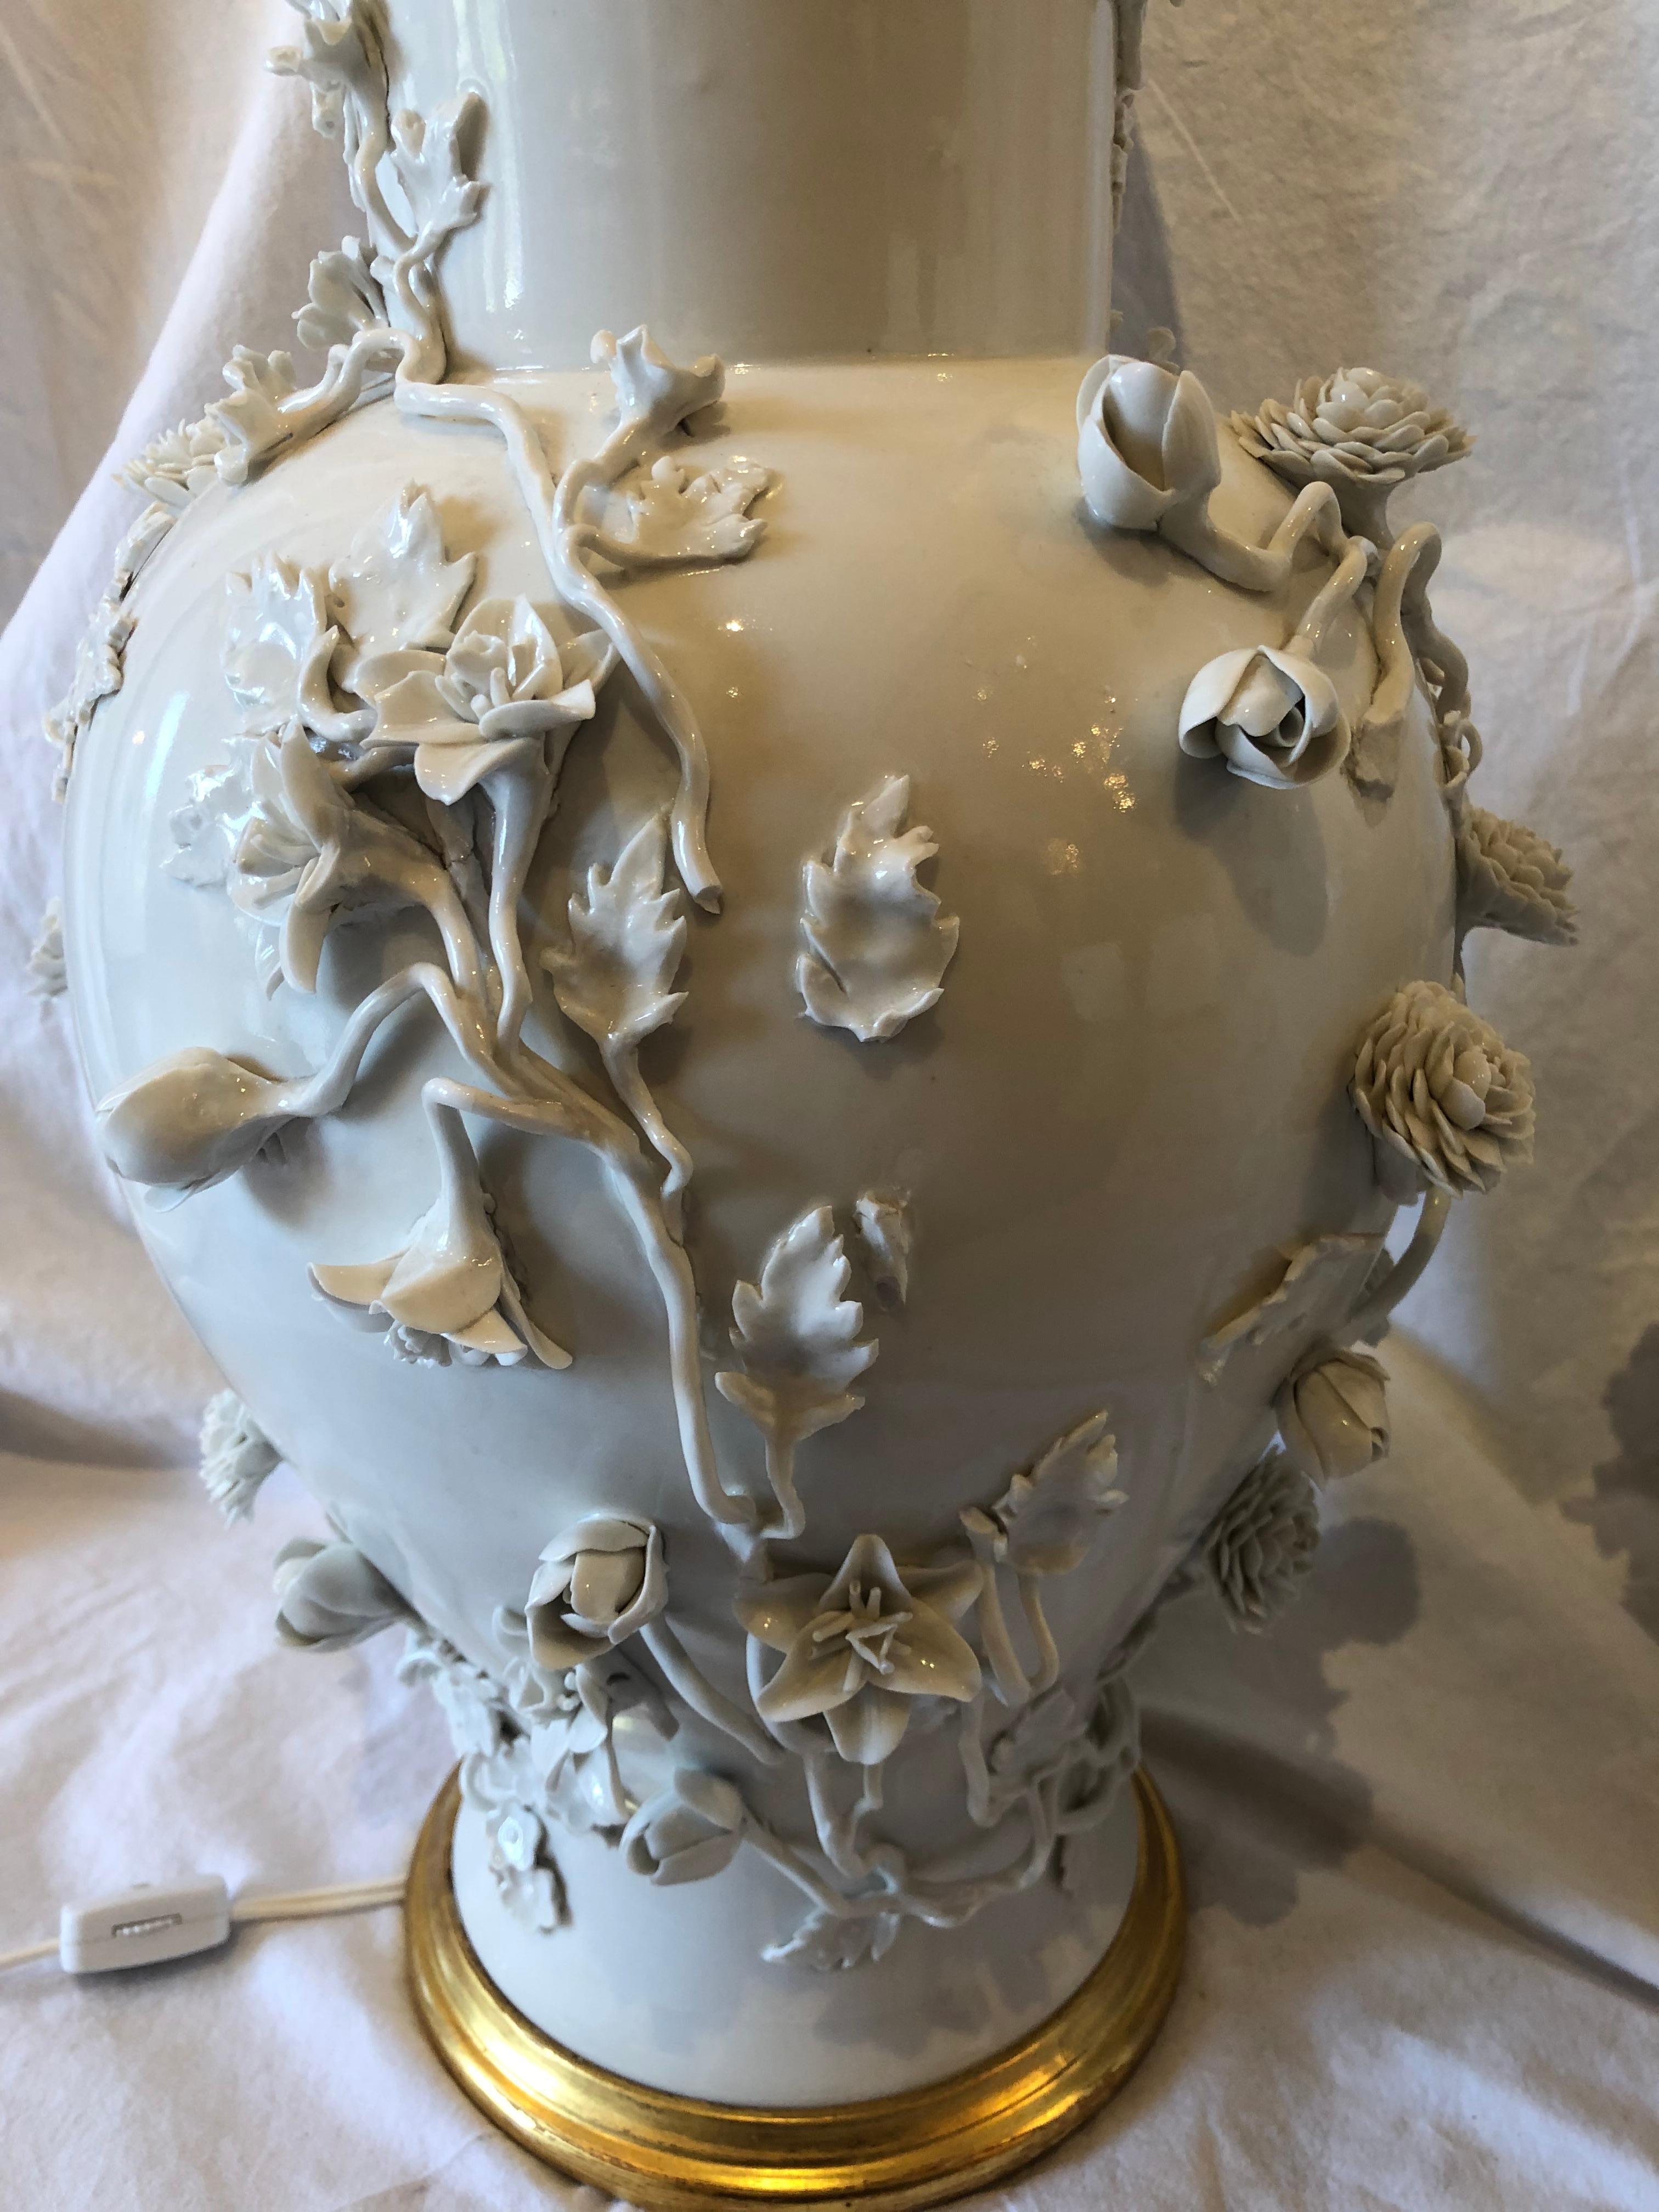 Pair of gorgeous Chinese white blanc d'chine porcelain vase lamps. Encrusted with flowers.

Republic Period.

Measures: Vases are 18